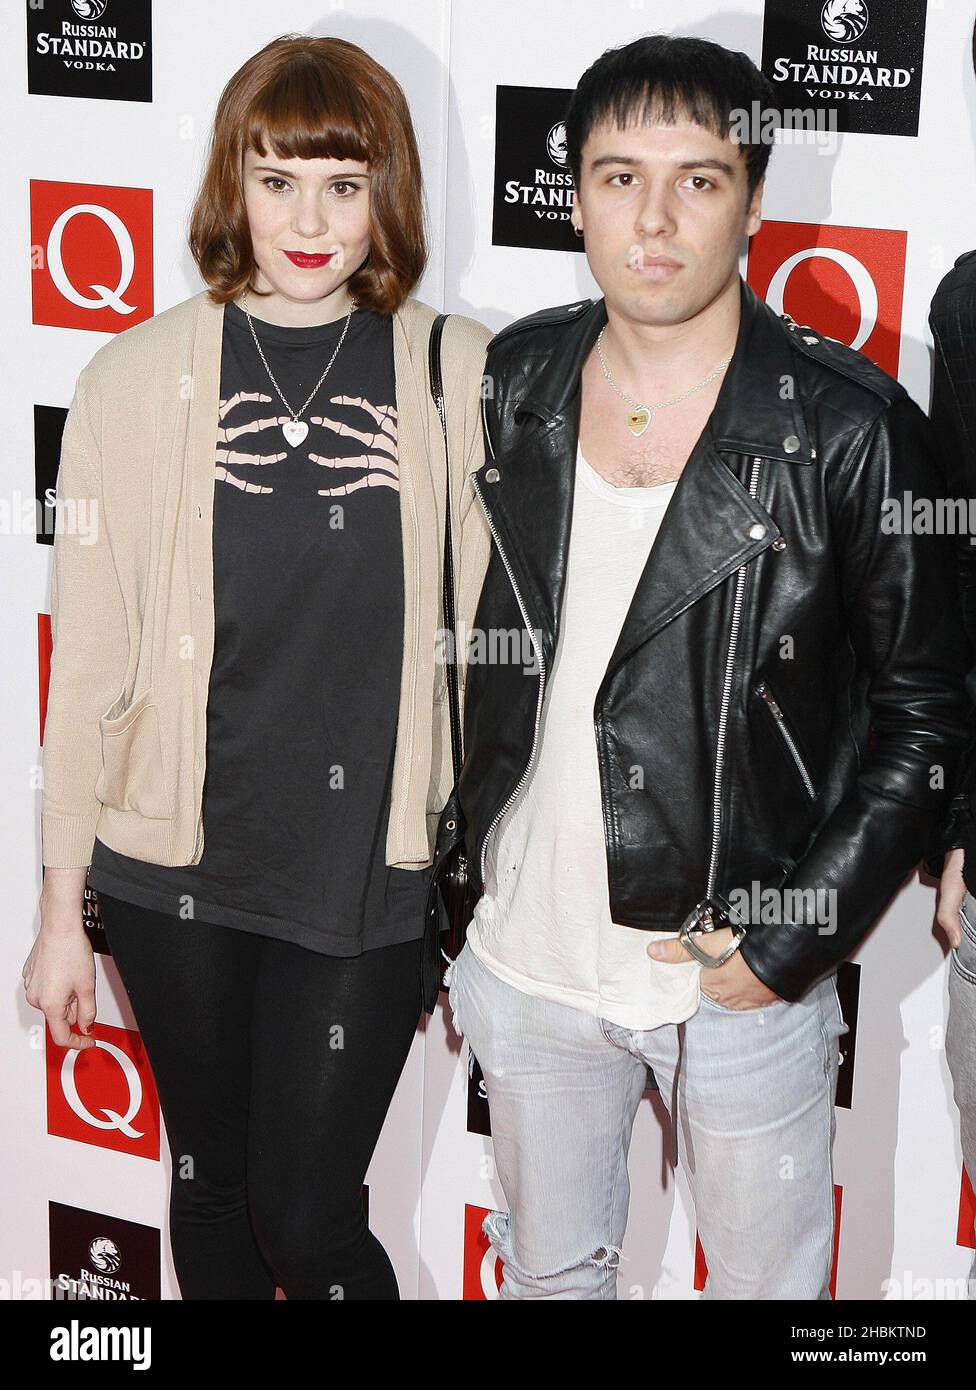 Kate Nash and boyfriend Ryan Jarman of The Cribs arrive at the Q Awards at the Grosvenor House Hotel in central London on October 26, 2009 Photo - Alamy